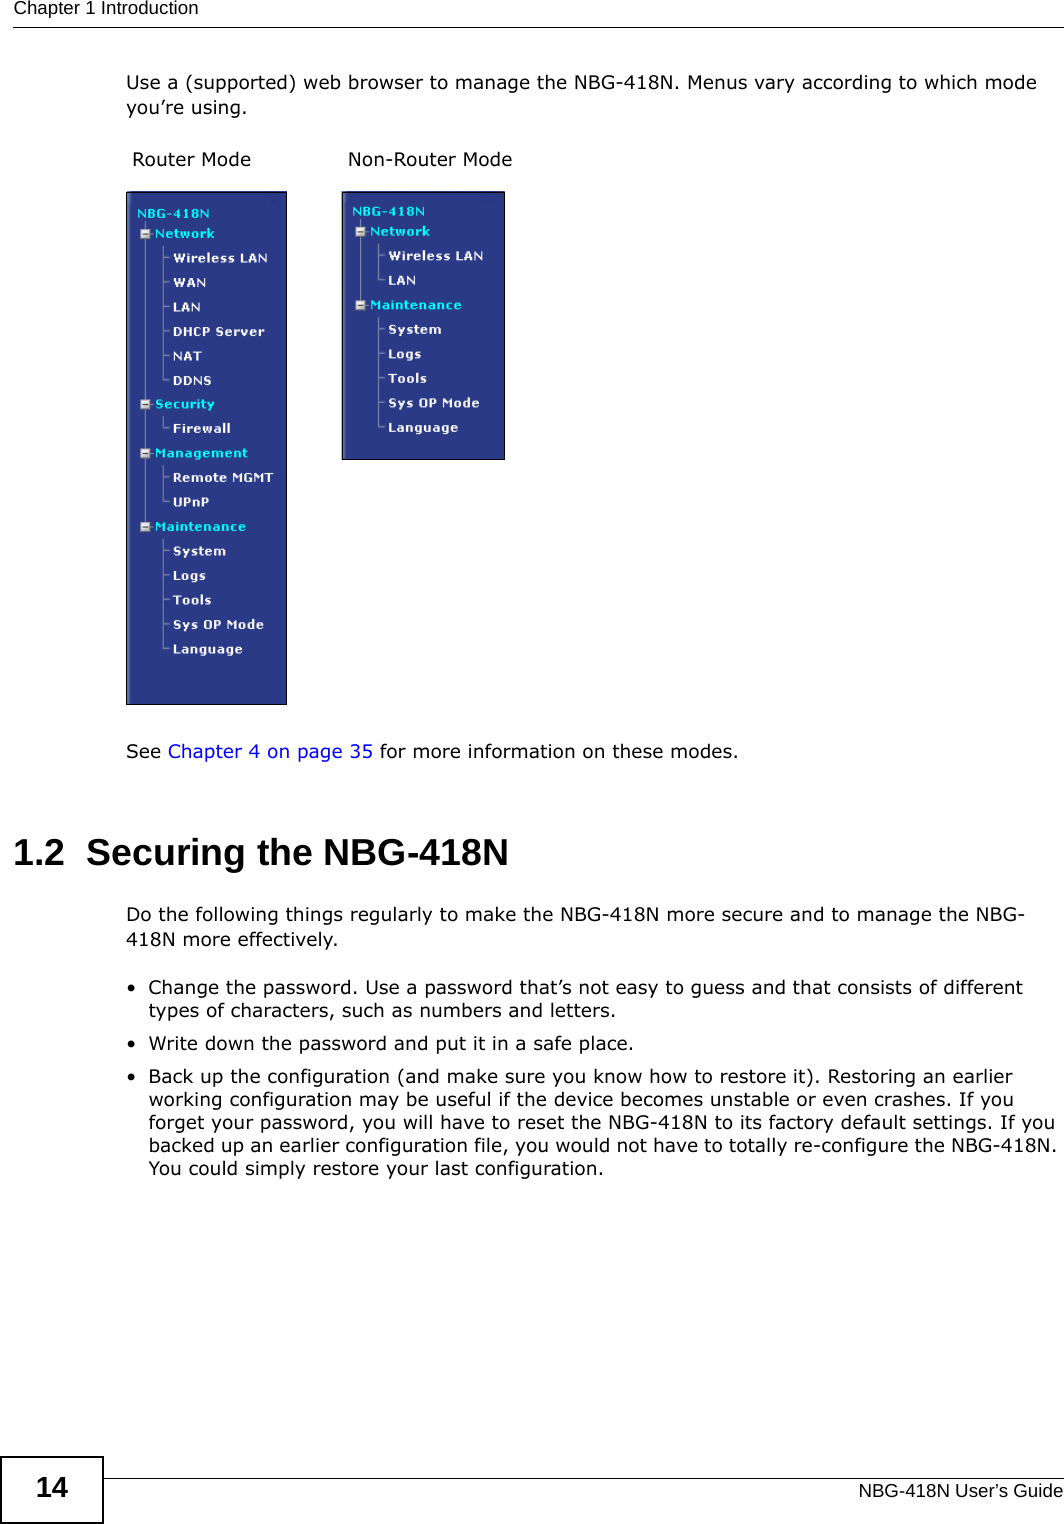 Chapter 1 IntroductionNBG-418N User’s Guide14Use a (supported) web browser to manage the NBG-418N. Menus vary according to which mode you’re using.See Chapter 4 on page 35 for more information on these modes.1.2  Securing the NBG-418NDo the following things regularly to make the NBG-418N more secure and to manage the NBG-418N more effectively.• Change the password. Use a password that’s not easy to guess and that consists of different types of characters, such as numbers and letters.• Write down the password and put it in a safe place.• Back up the configuration (and make sure you know how to restore it). Restoring an earlier working configuration may be useful if the device becomes unstable or even crashes. If you forget your password, you will have to reset the NBG-418N to its factory default settings. If you backed up an earlier configuration file, you would not have to totally re-configure the NBG-418N. You could simply restore your last configuration.Router Mode Non-Router Mode